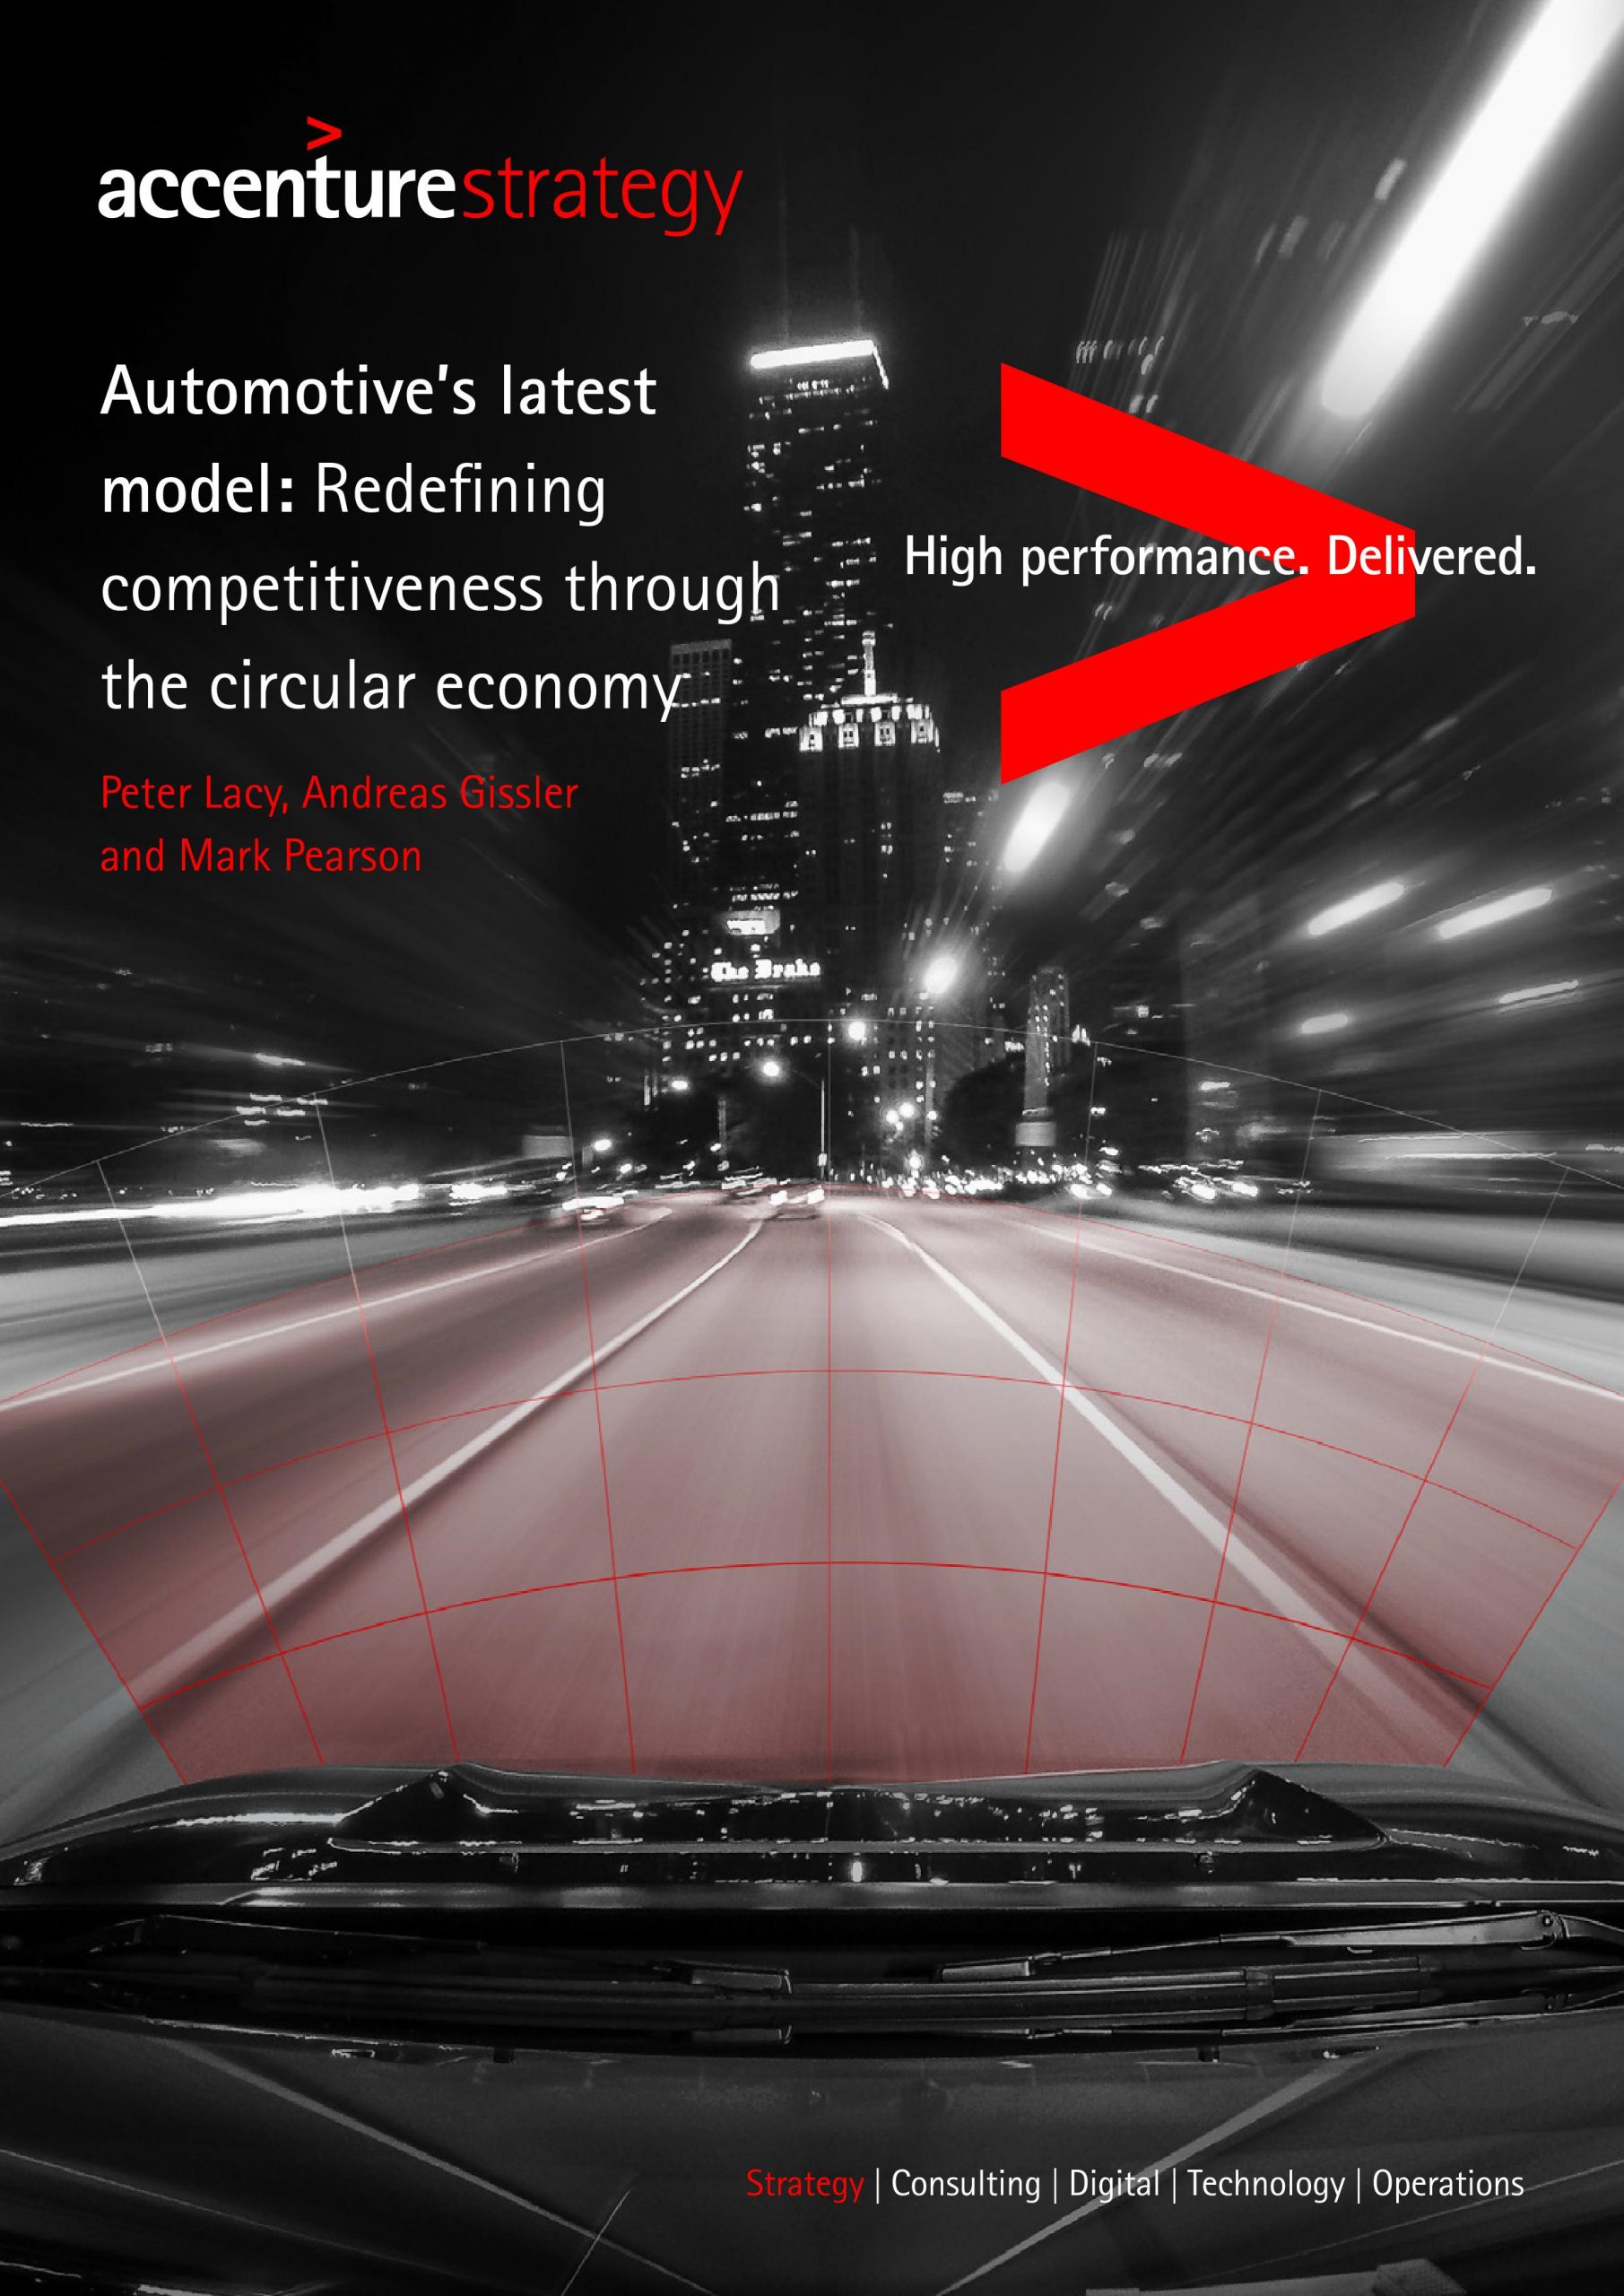 Automotive’s latest model: Redefining competitiveness through the circular economy